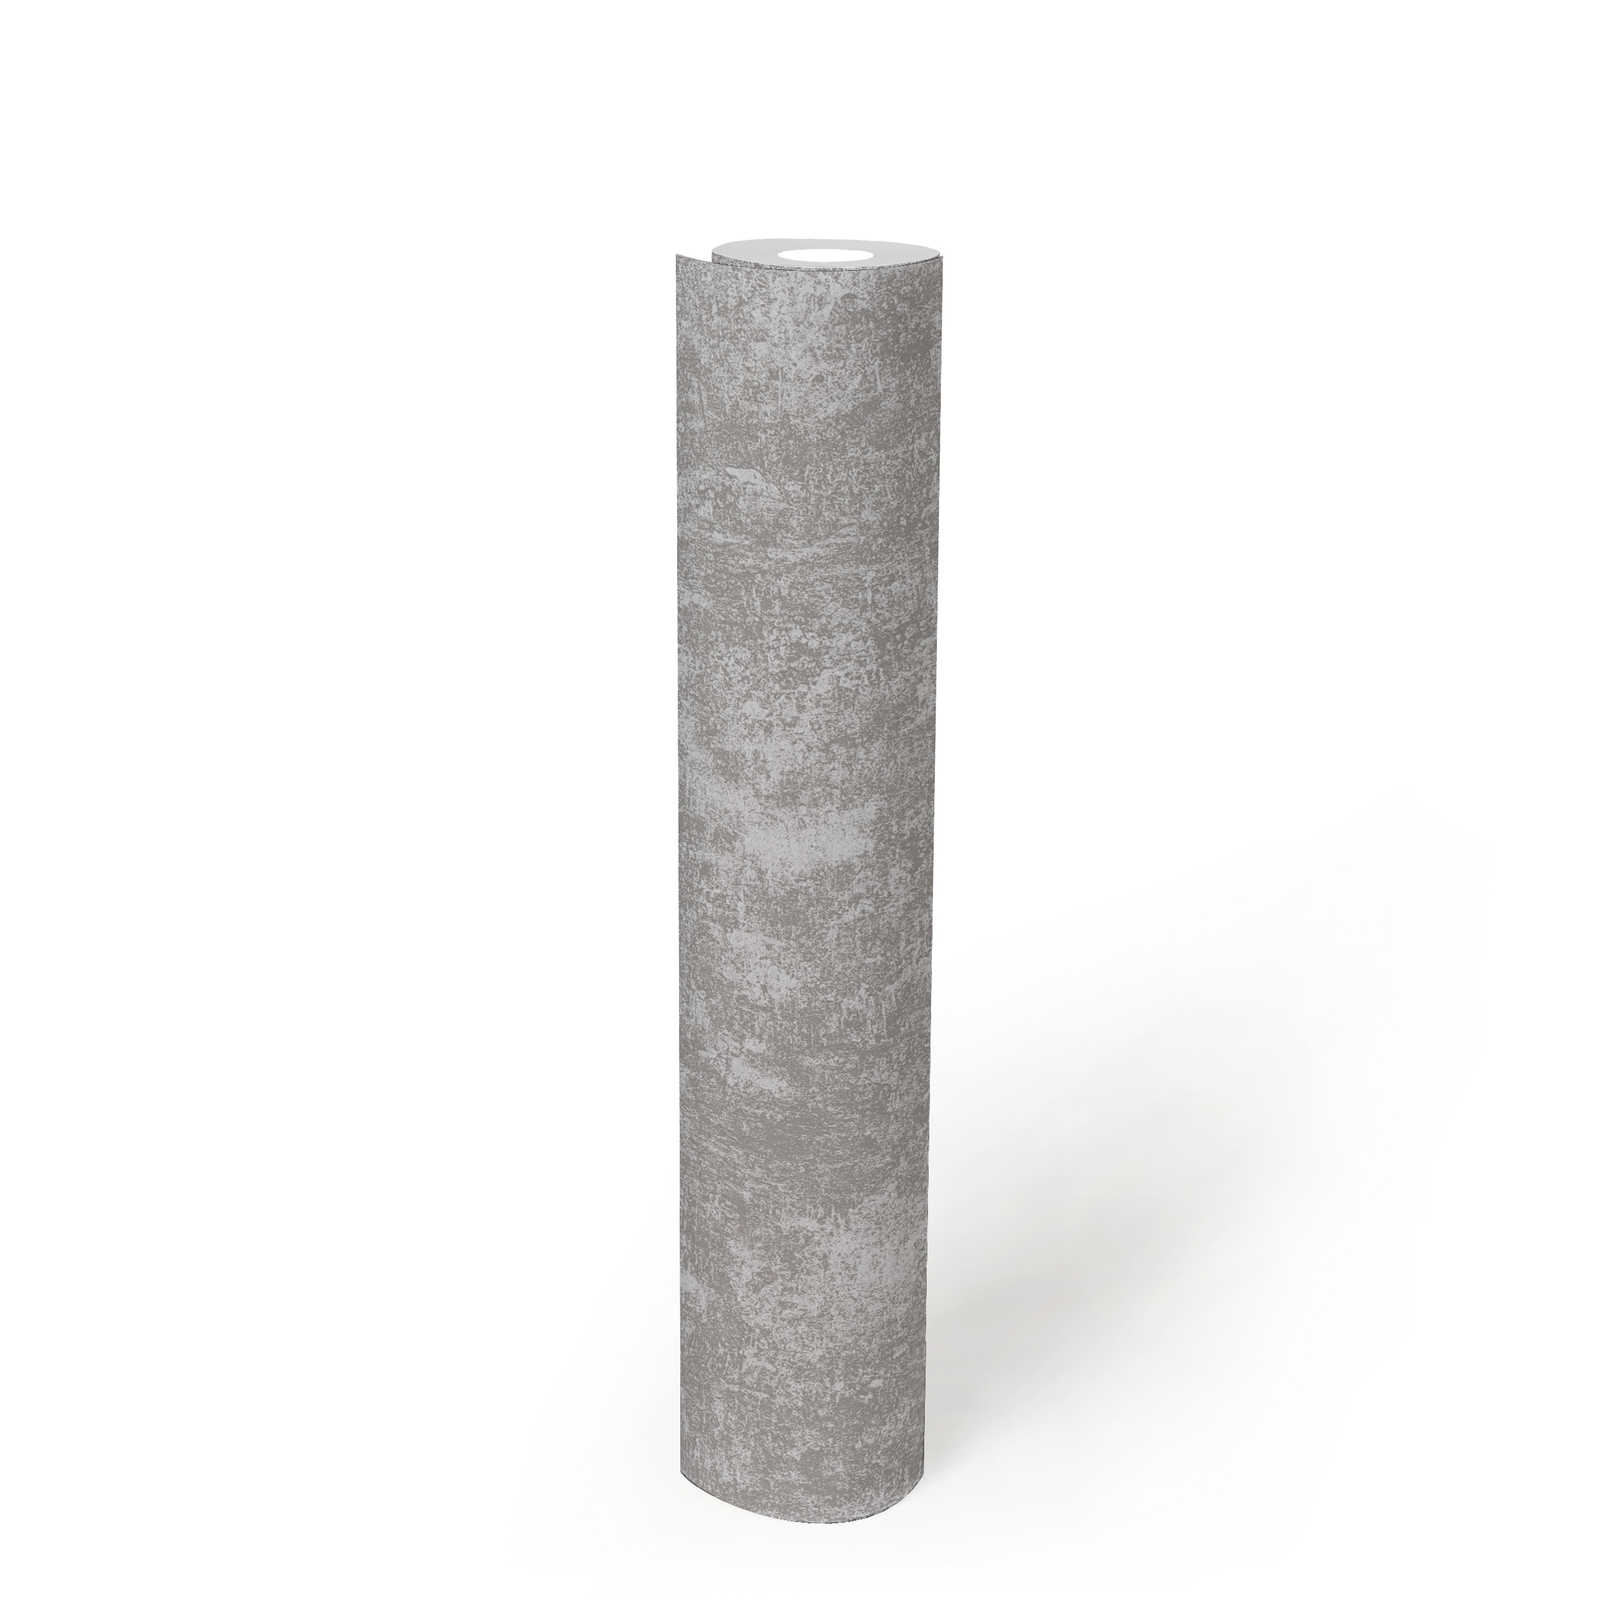             Wallpaper with metallic and gloss effect smooth - silver, grey, metallic
        